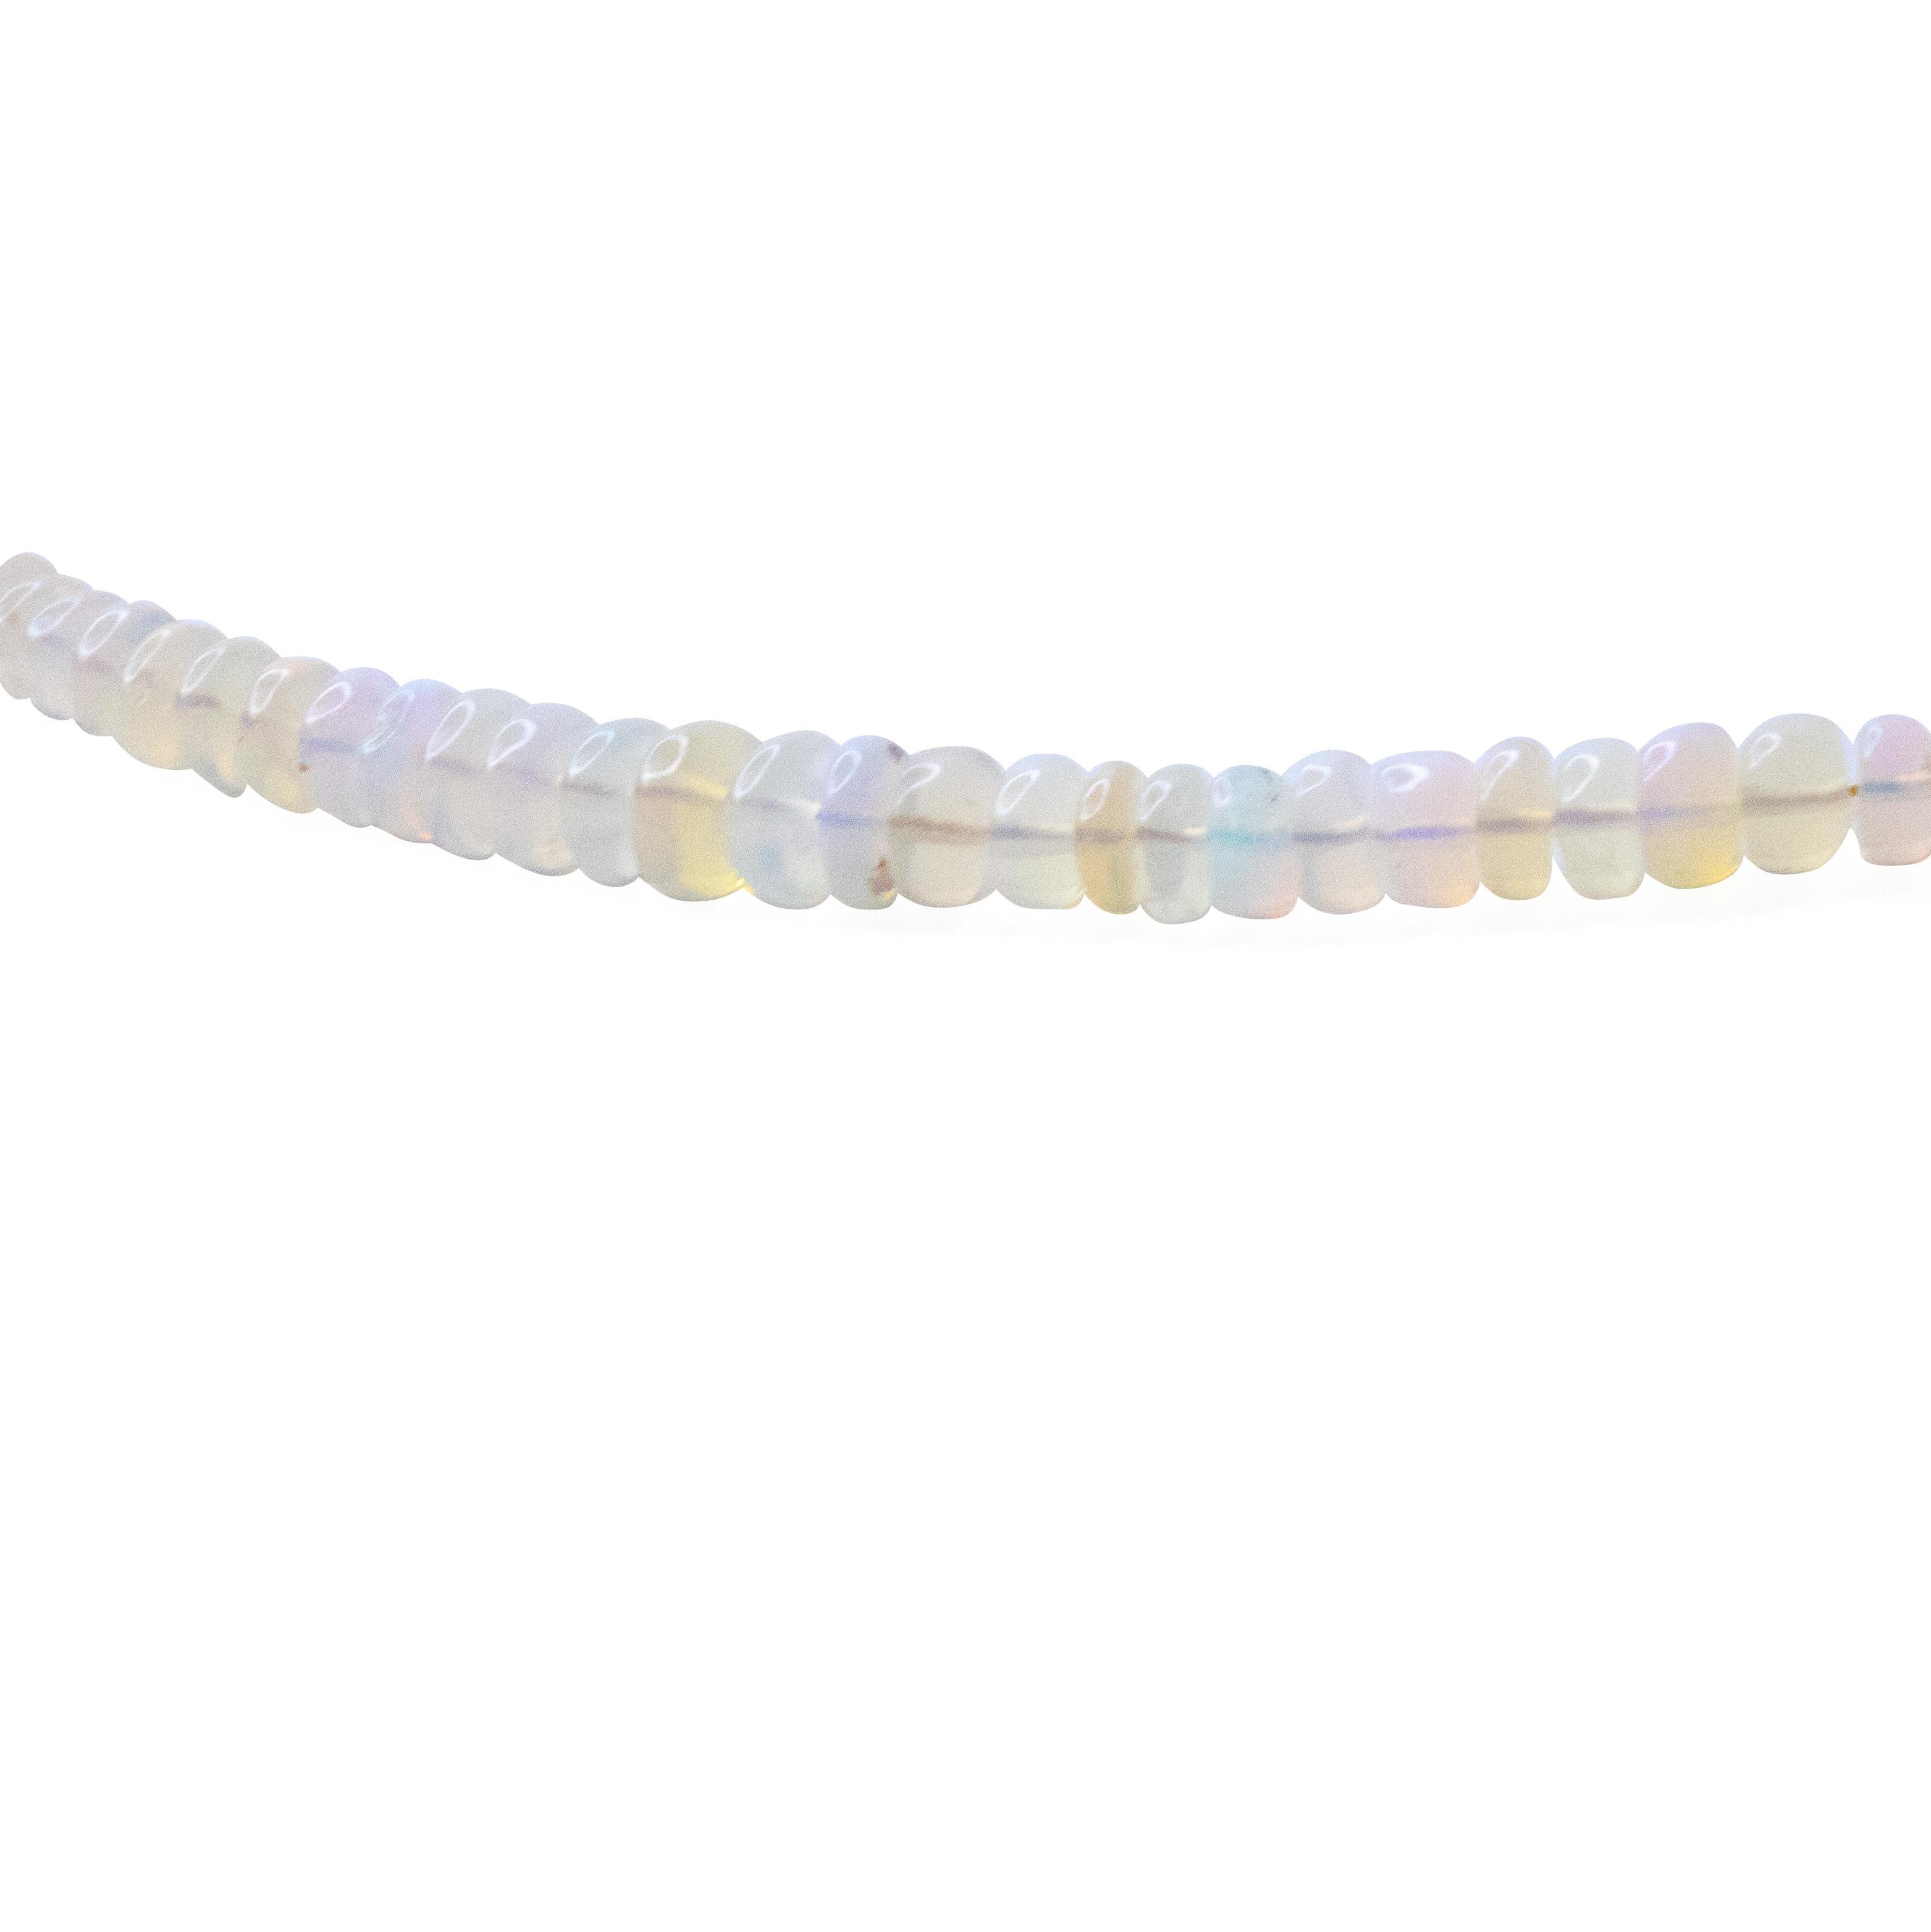 Women's Ethiopian Opal Necklace - by Bombyx House For Sale